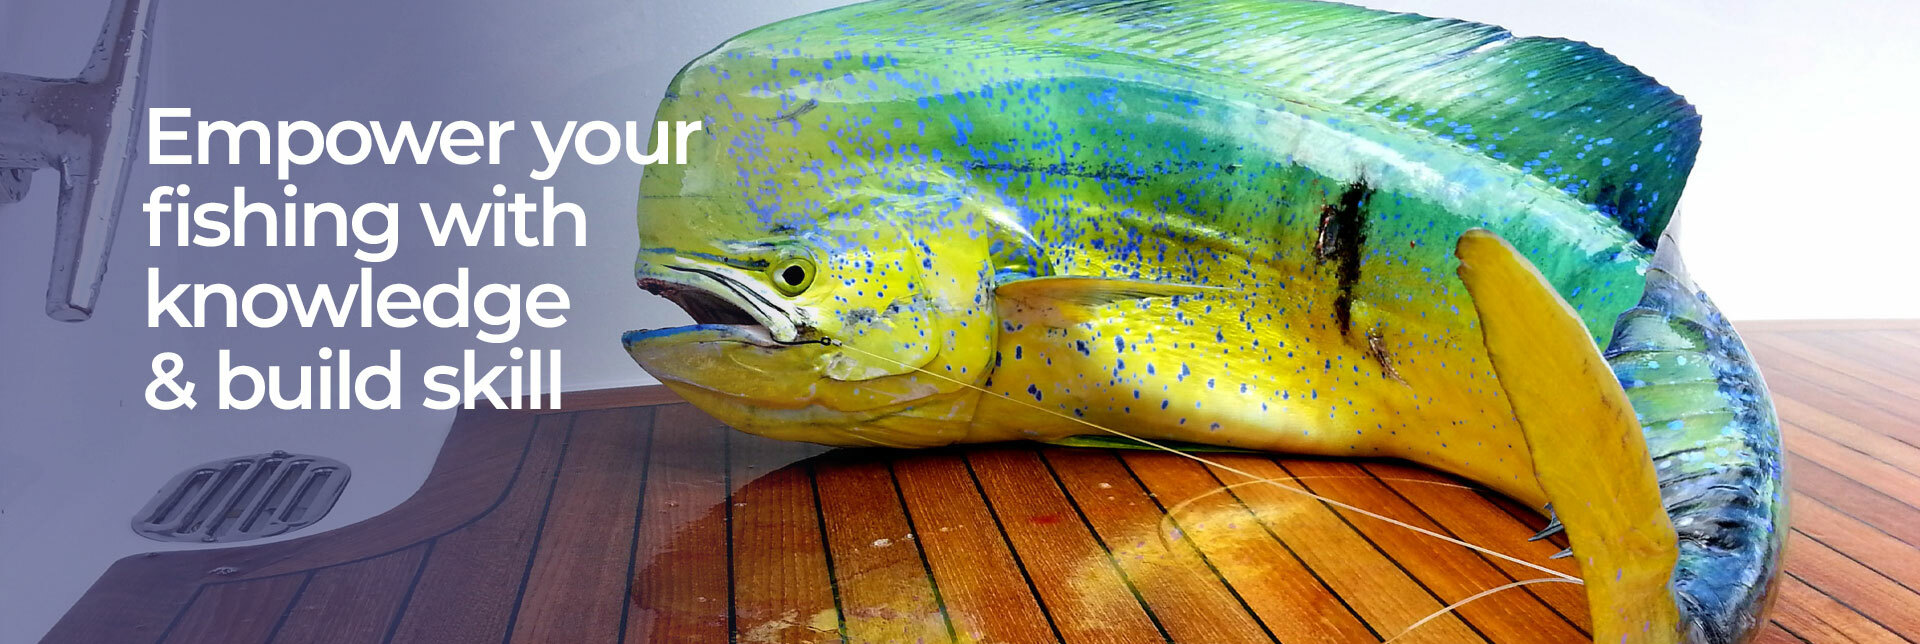 Dolphin - Empower your fishing with knowledge & build skill, In the Spread Home Slider